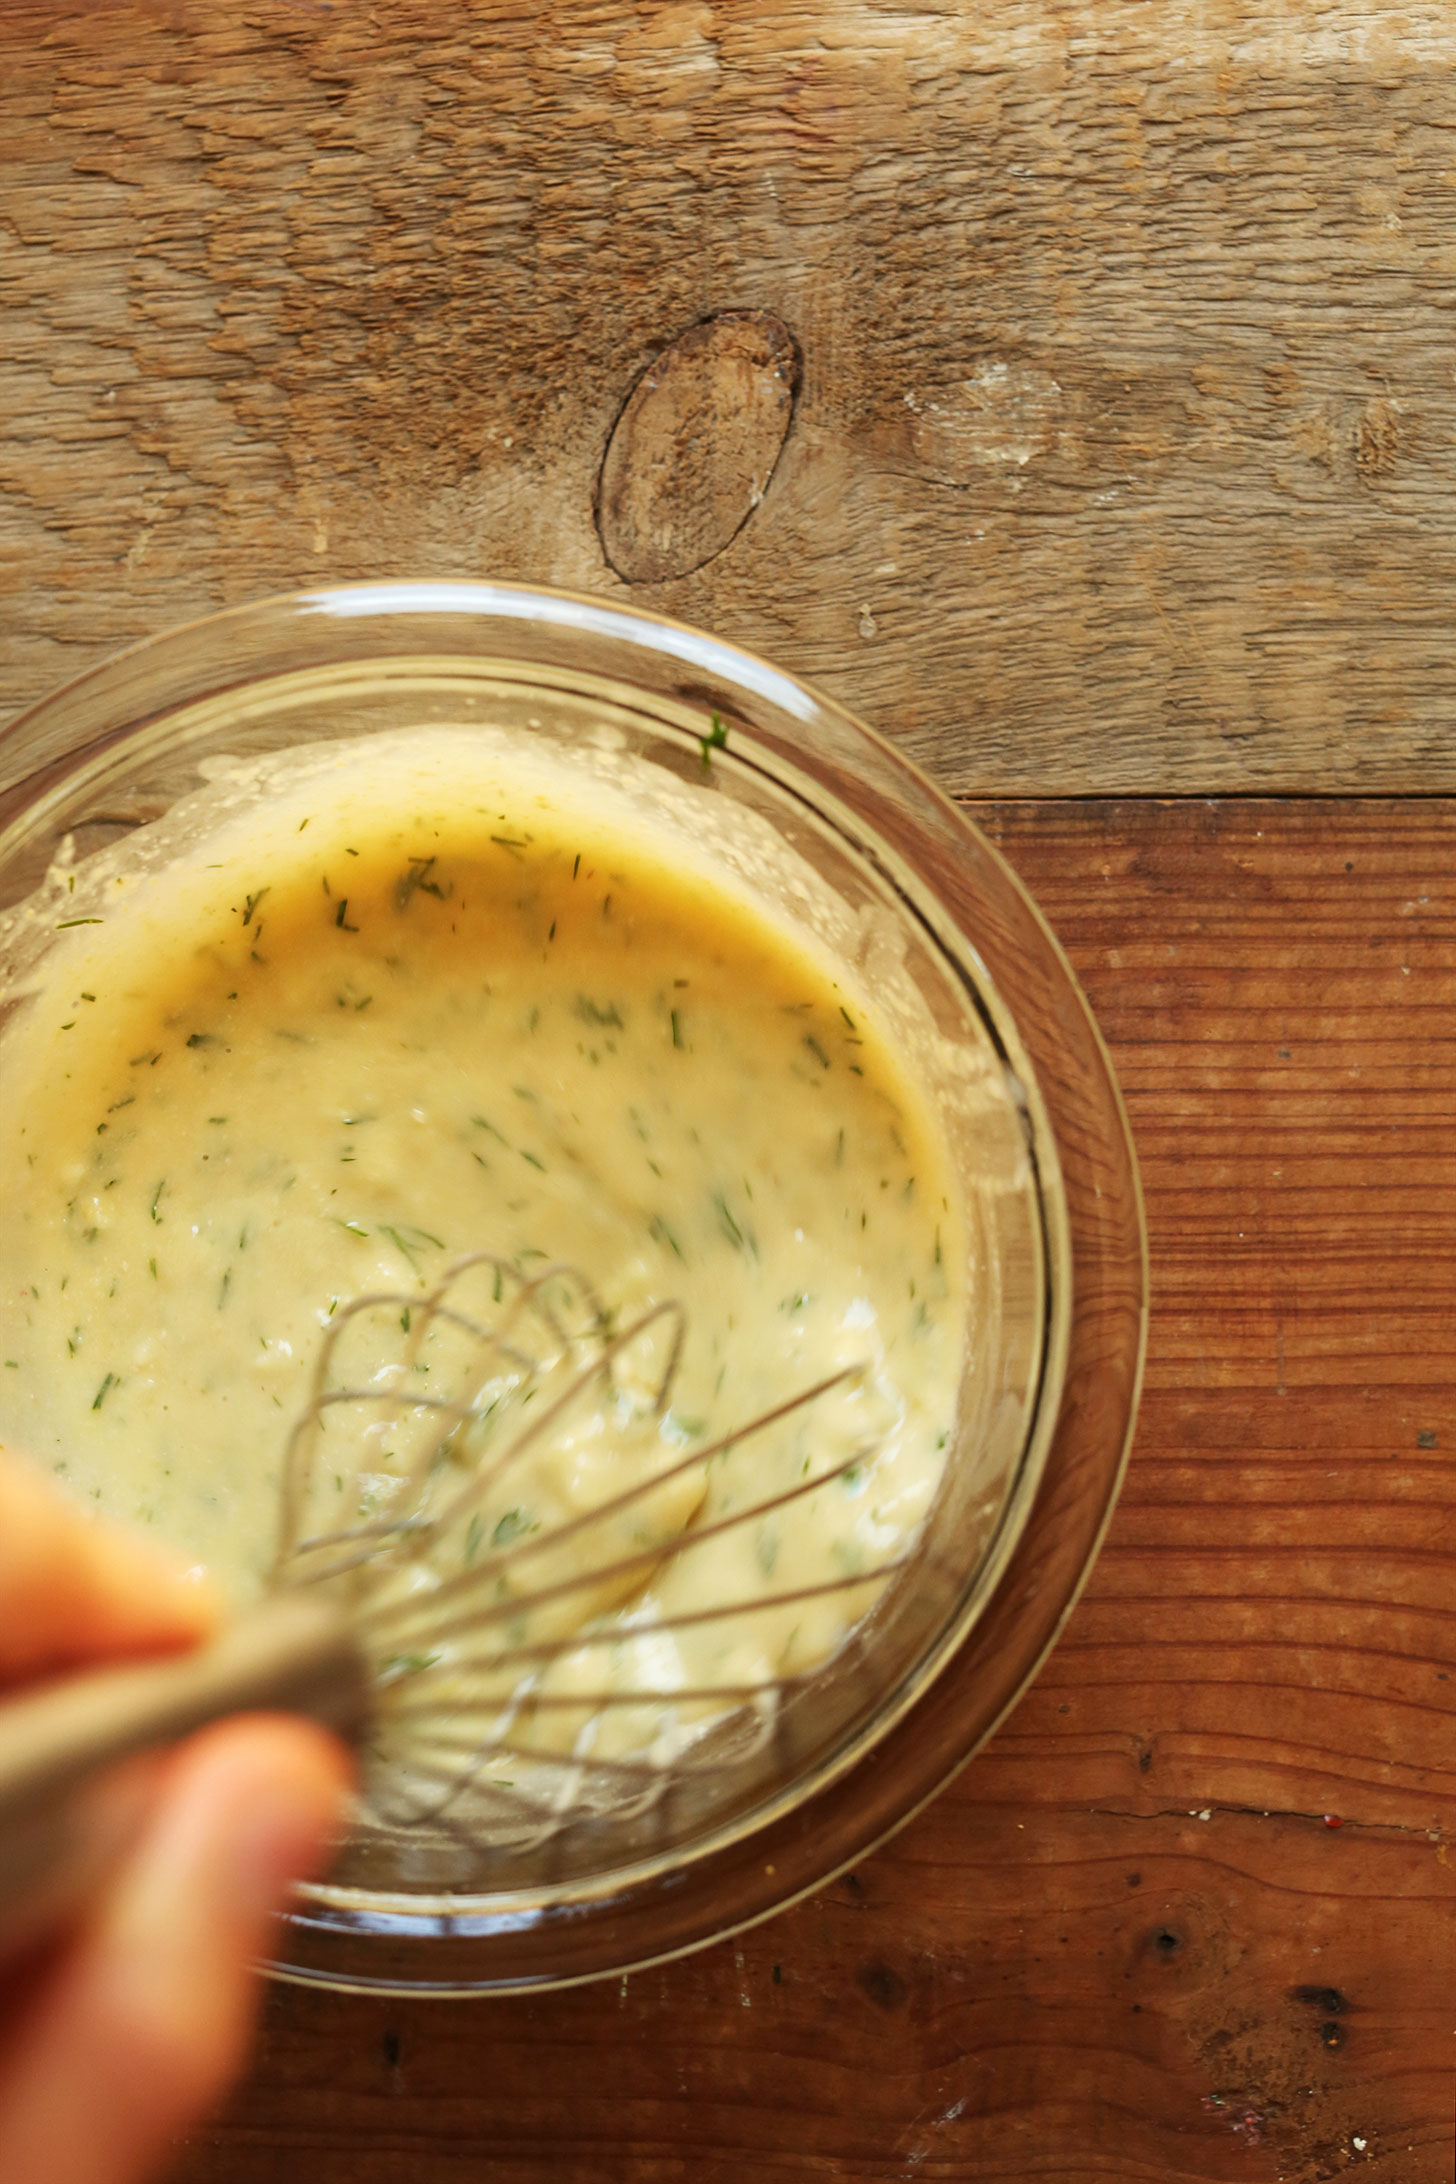 Whisking together Garlic Dill Sauce for our Broccoli Sweet Potato Chickpea Salad recipe